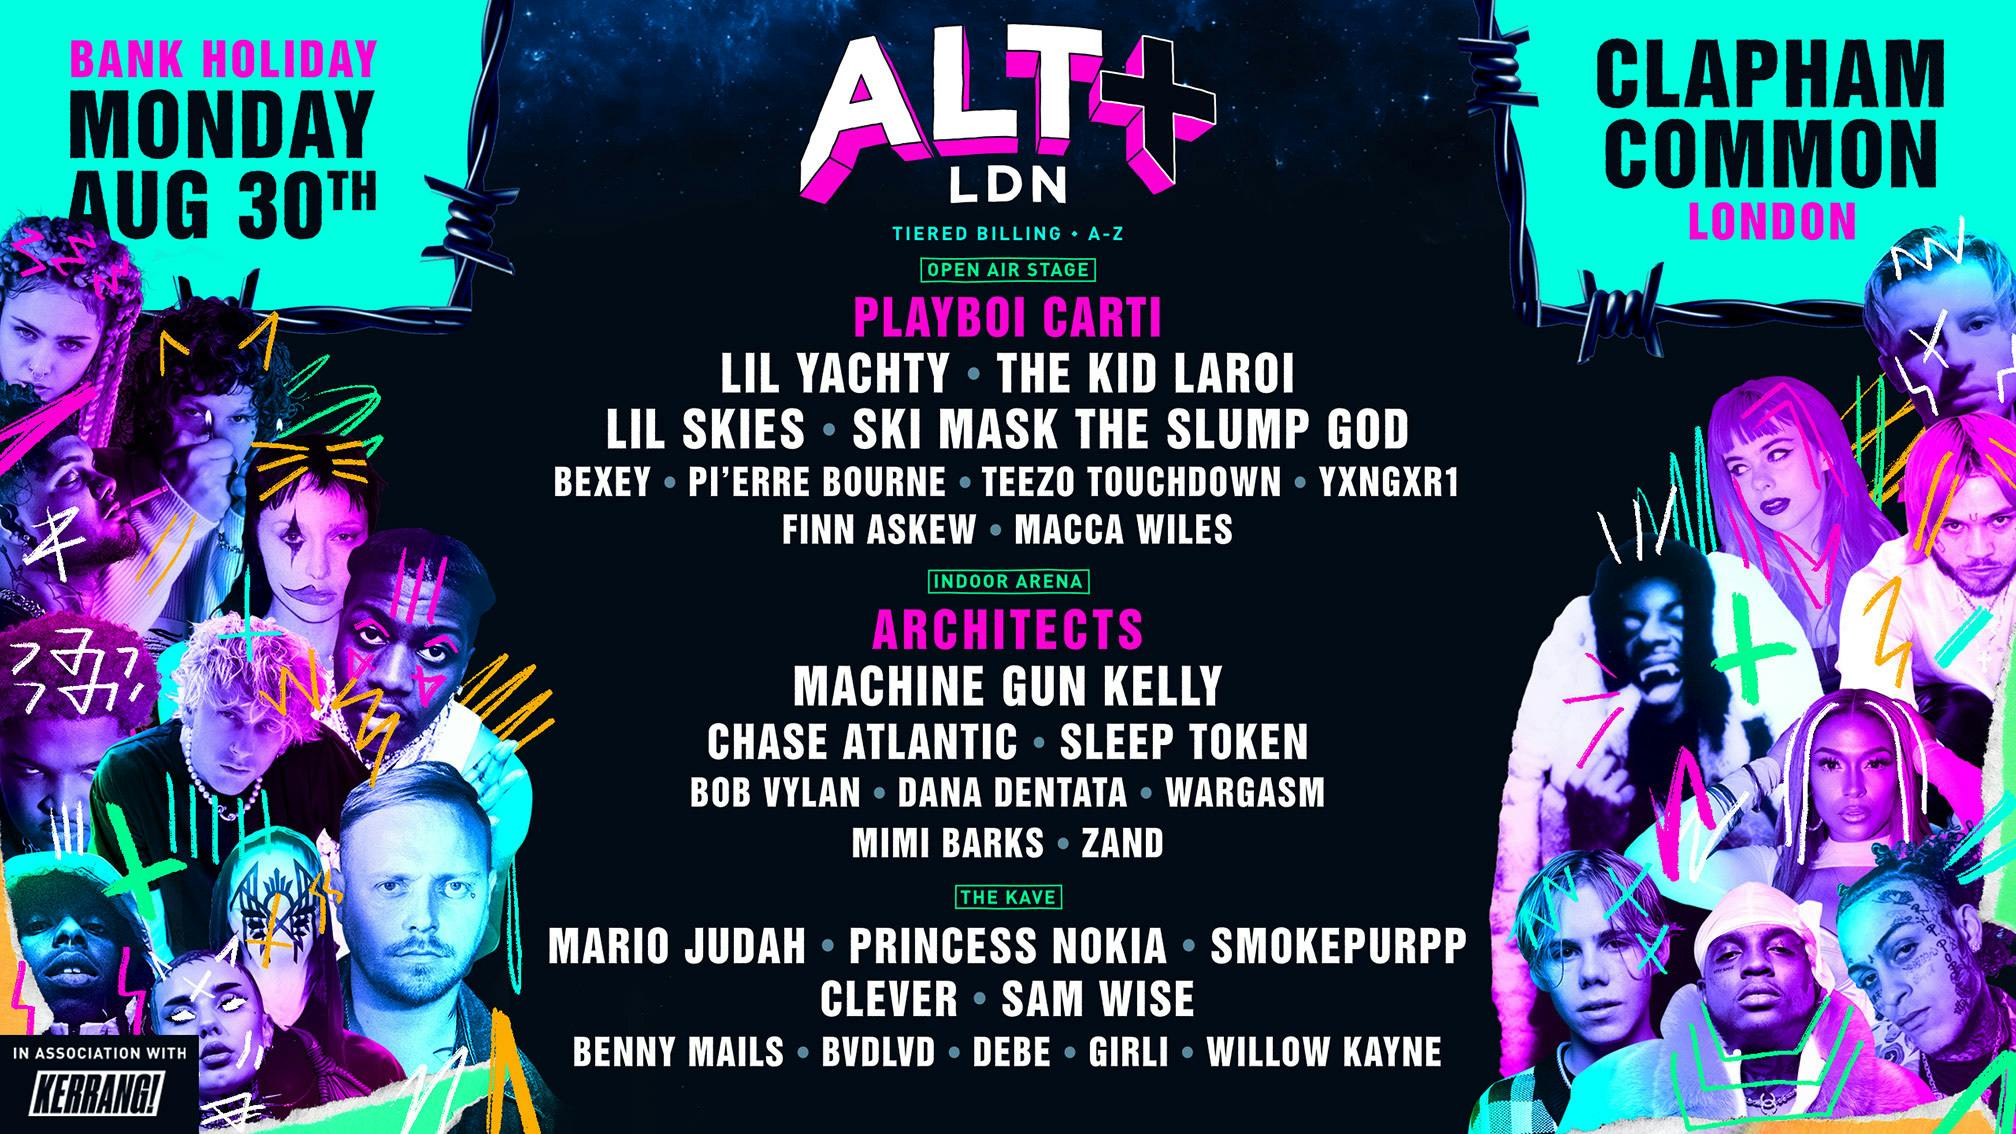 UK’s first rock and hip-hop festival ALT+LDN add Chase Atlantic, Wargasm and more to line-up